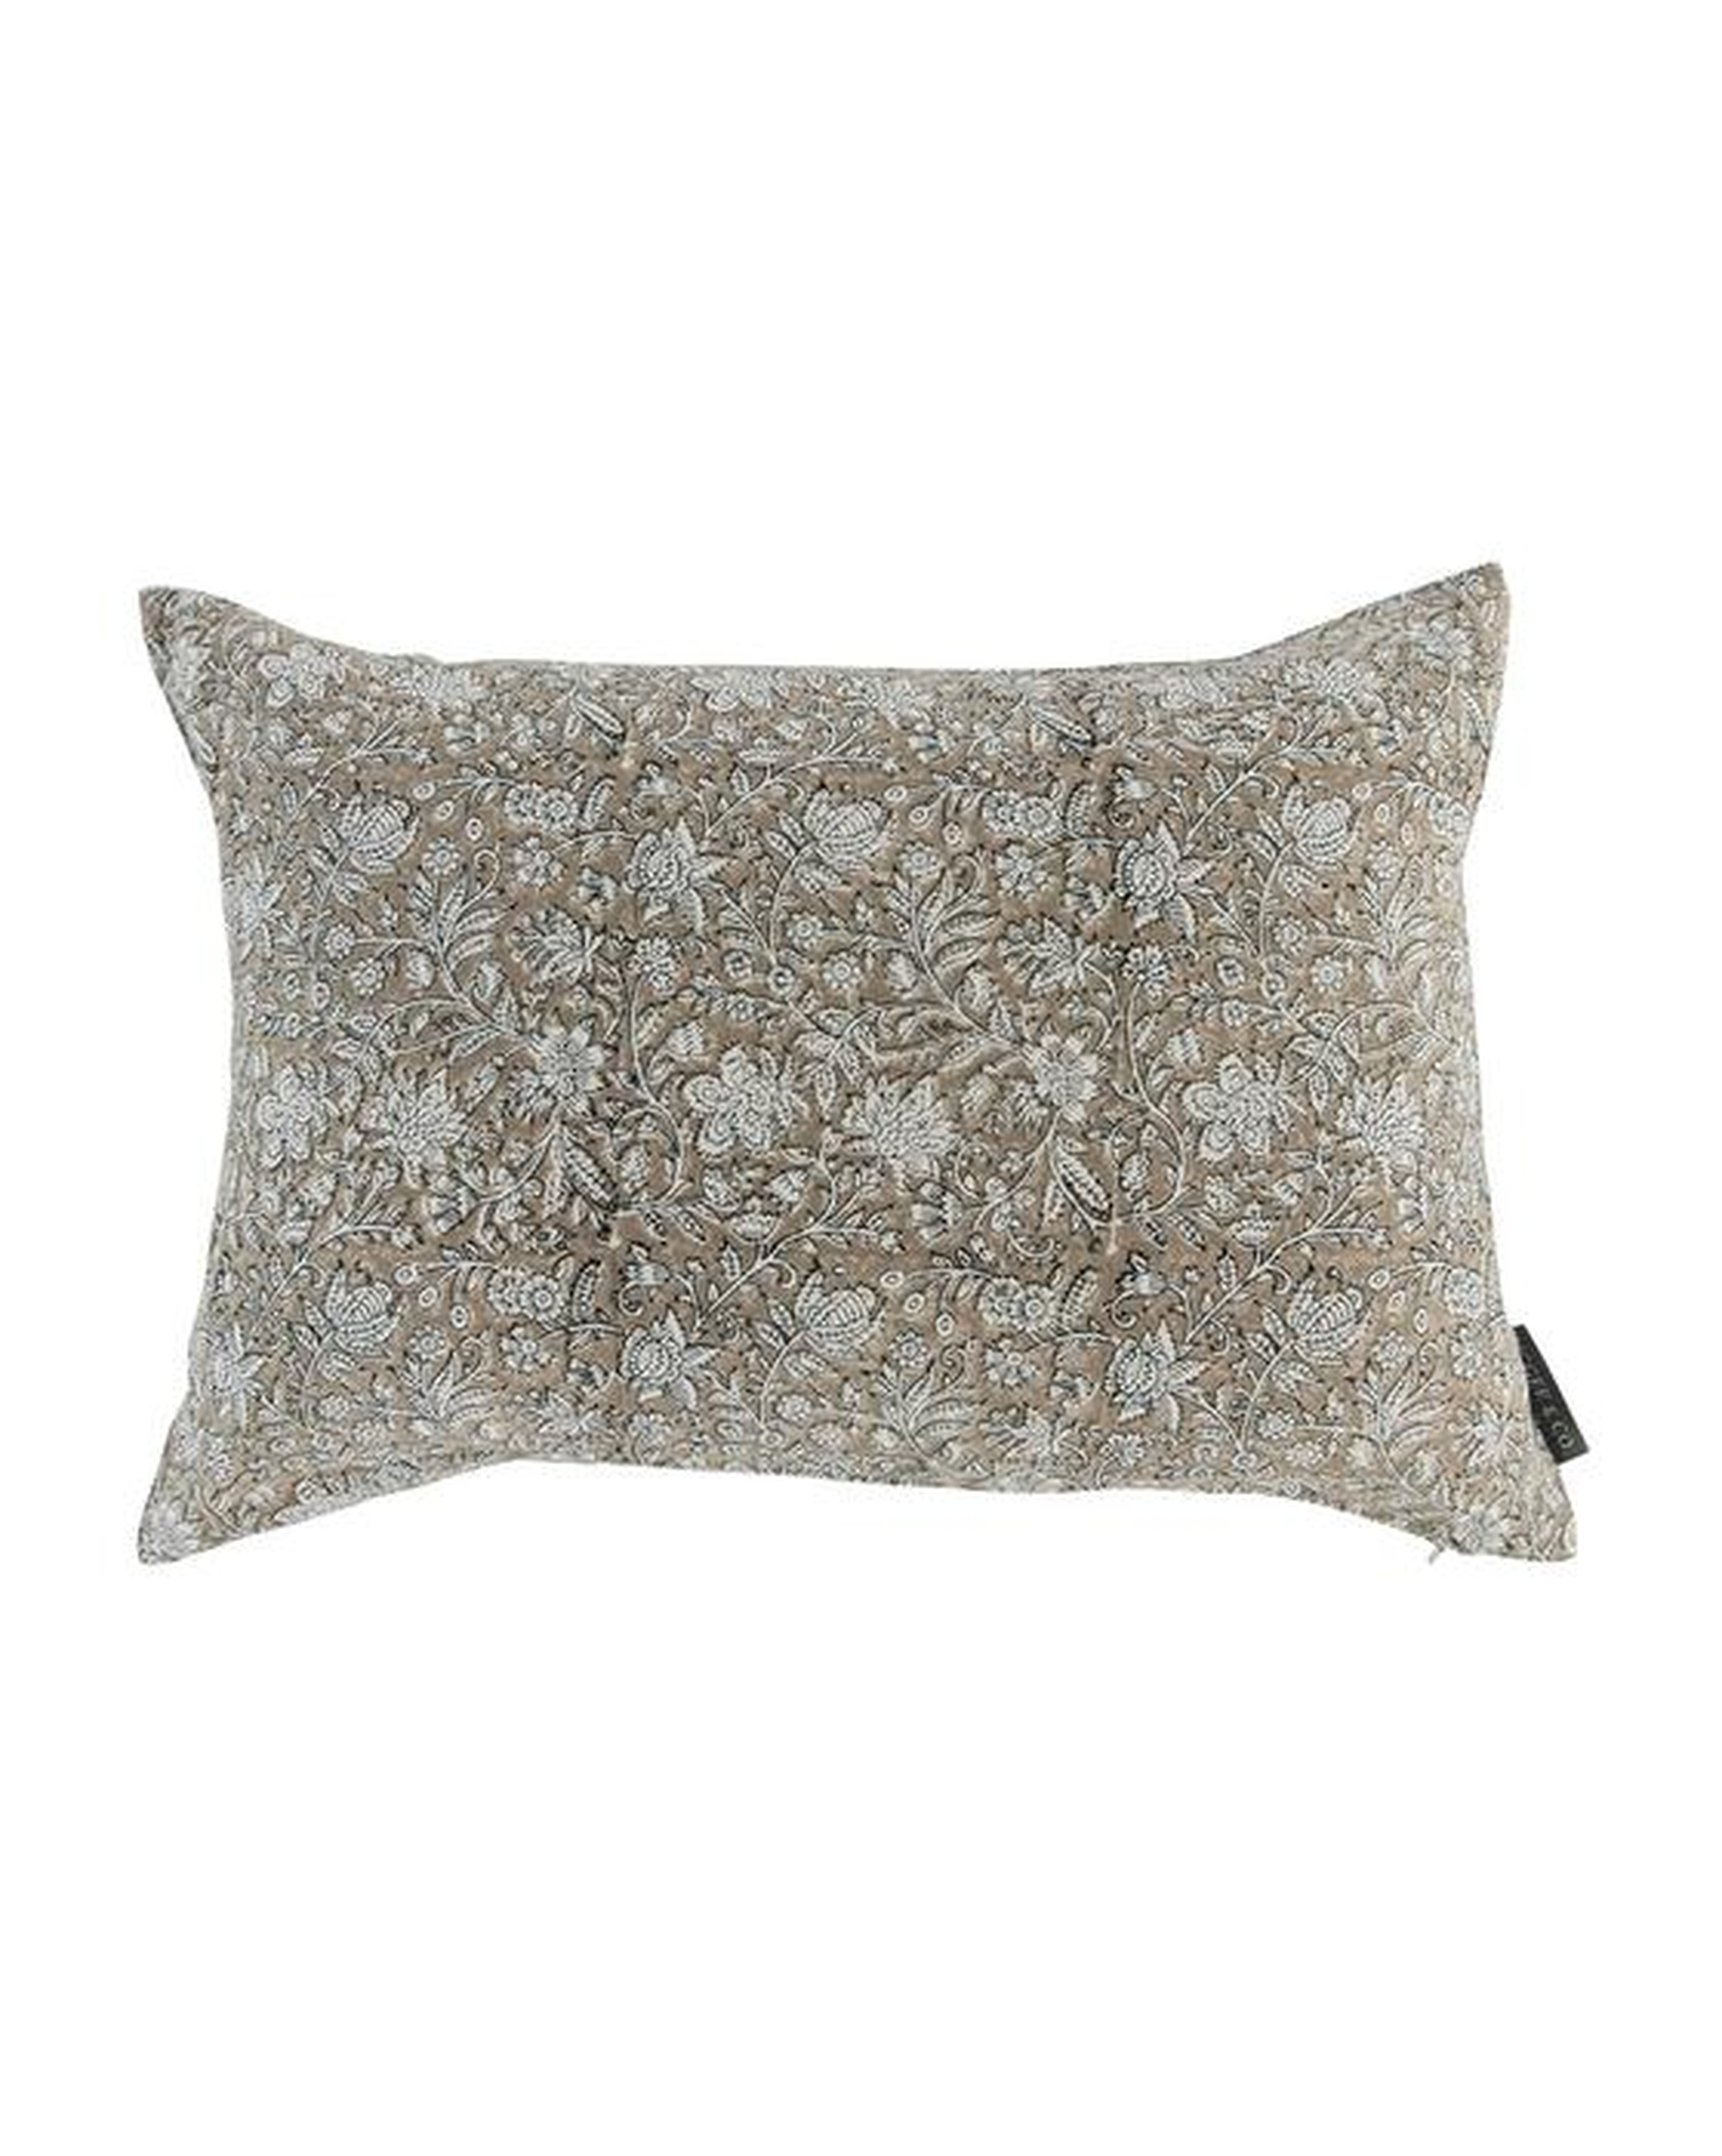 Mira Pillow Cover, 14" x 20" - McGee & Co.